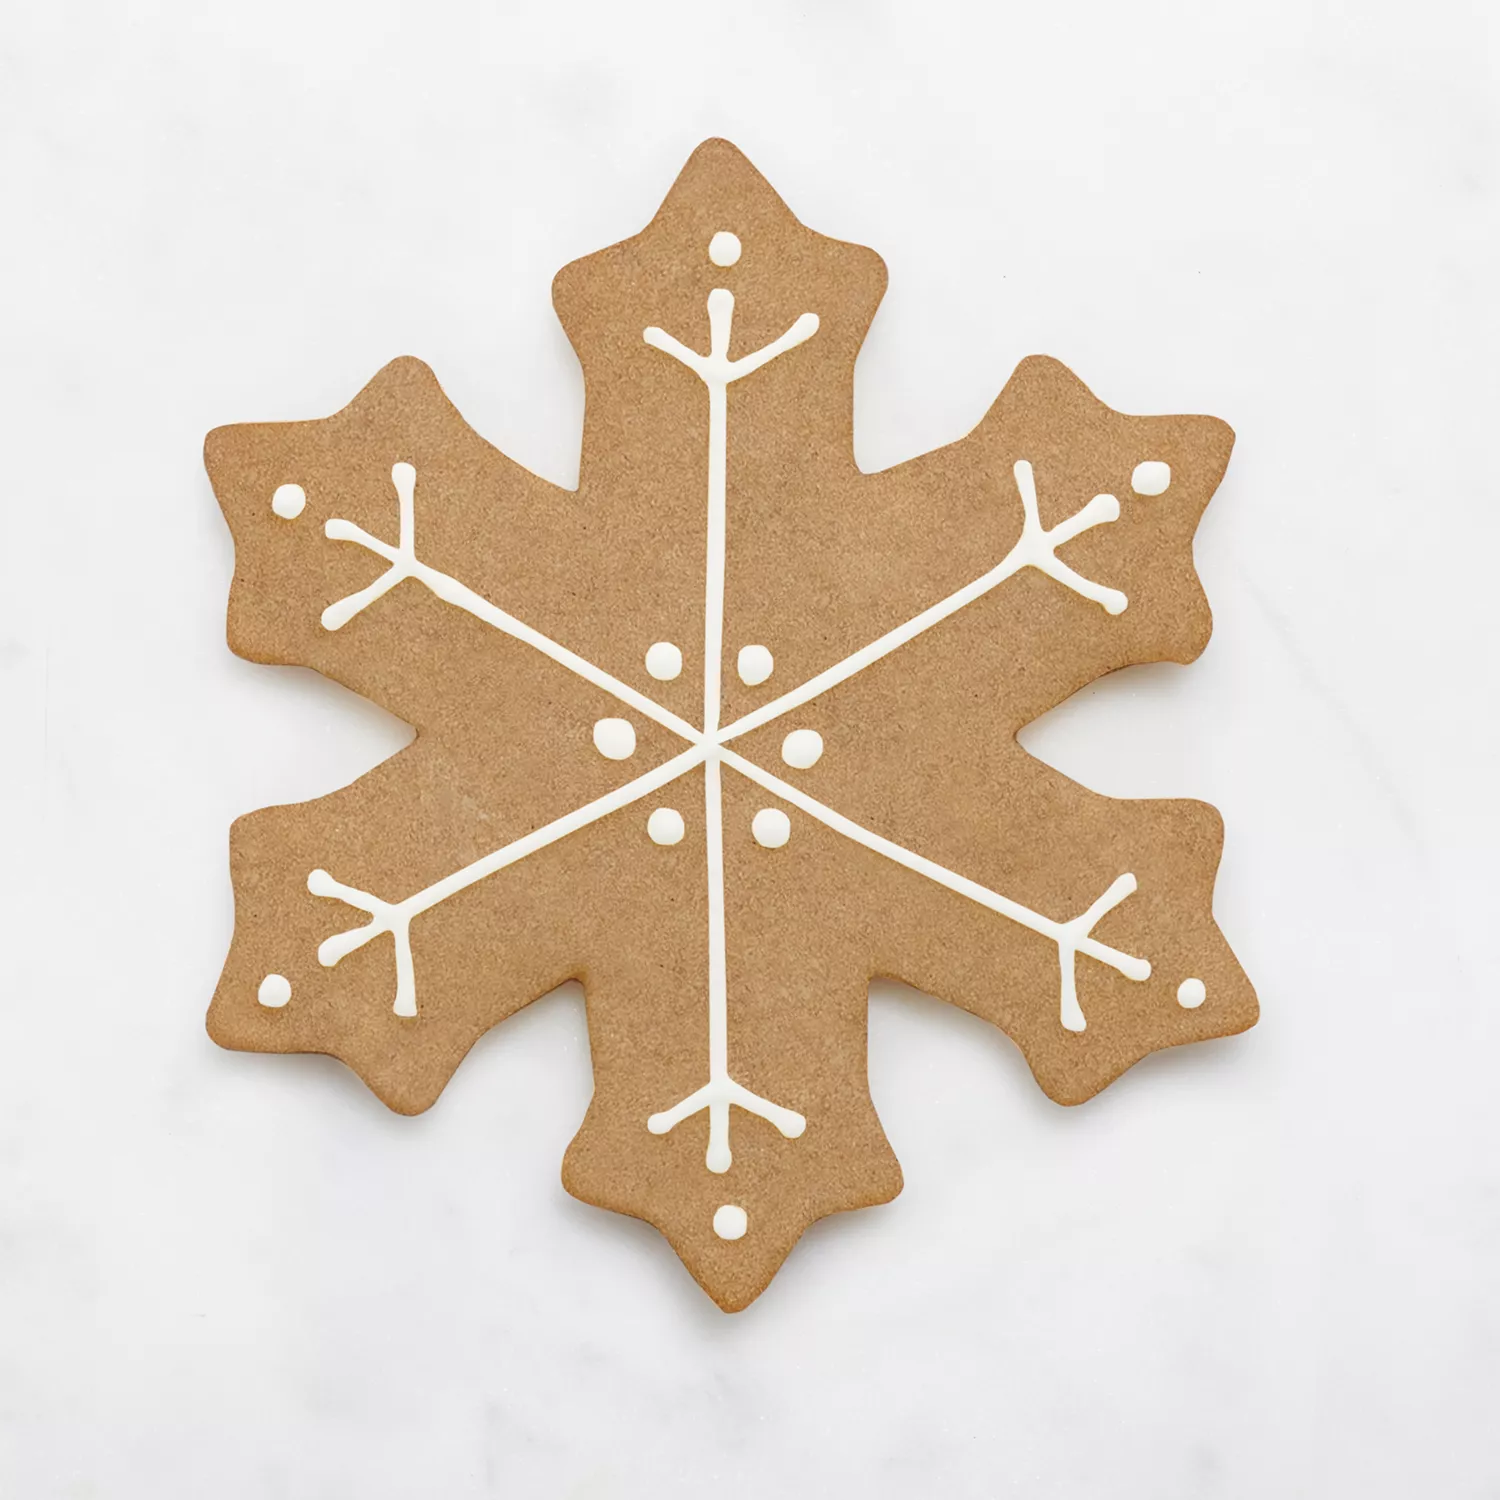 WILTON Snowflake cookie muffin top pan copper color